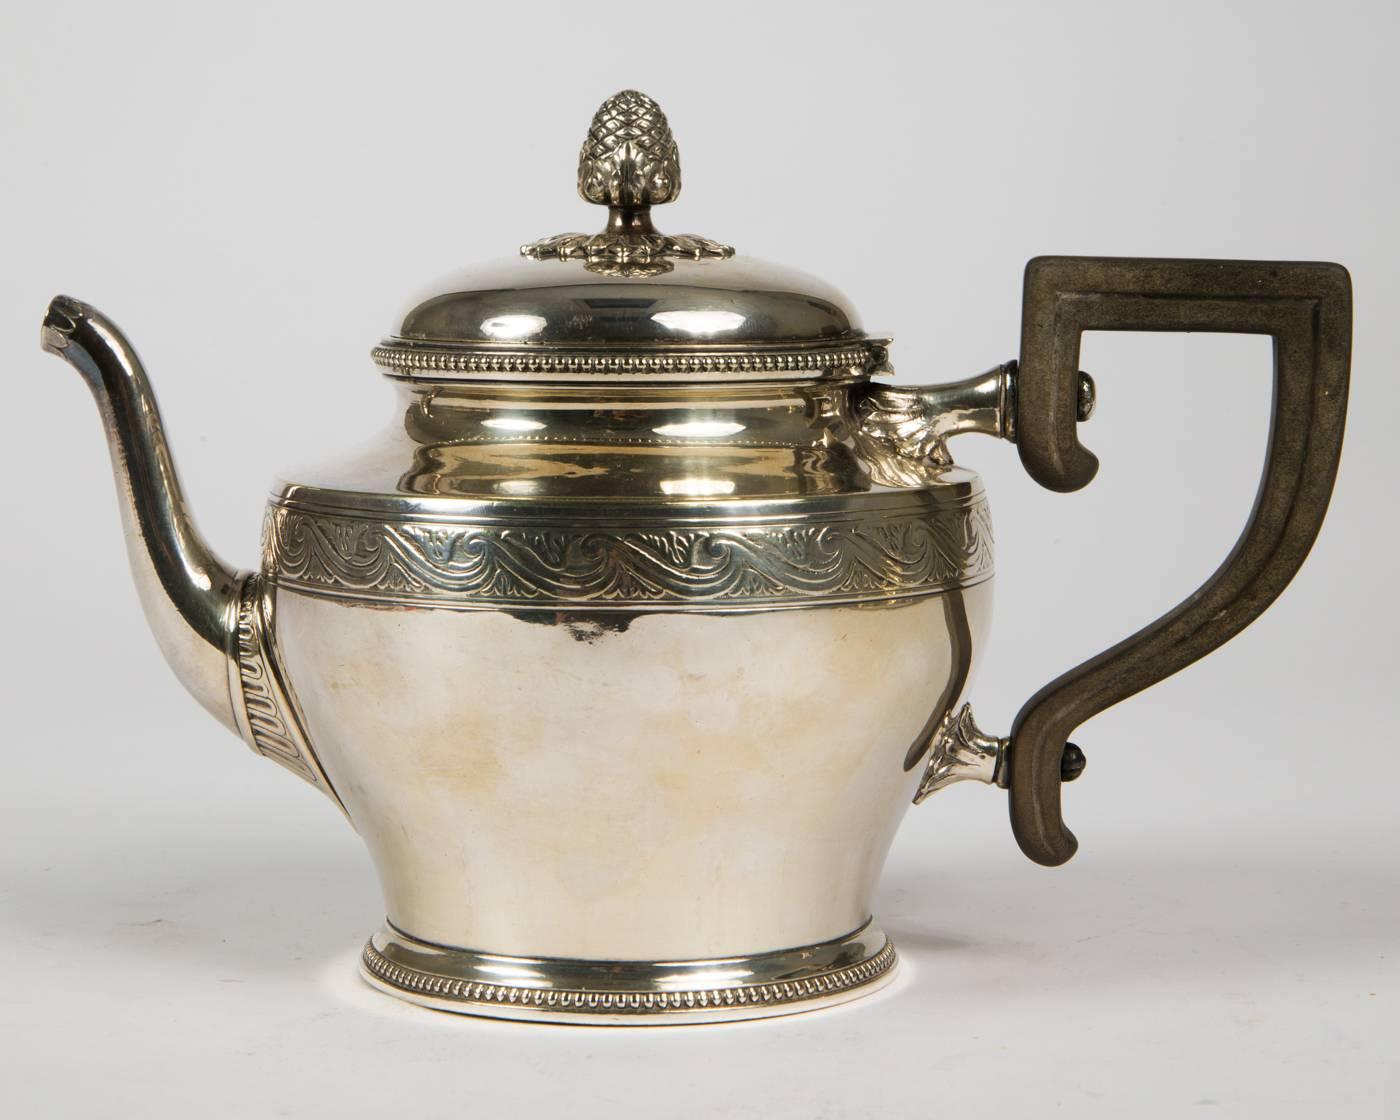 Set of five silver plated service, consisting of mocha and teapot with ebony handles, cream jug, sugar tray and tray, on the underside punctured company name, silver plated metal outside and gold-plated inside, total weight 2463 g, partial small